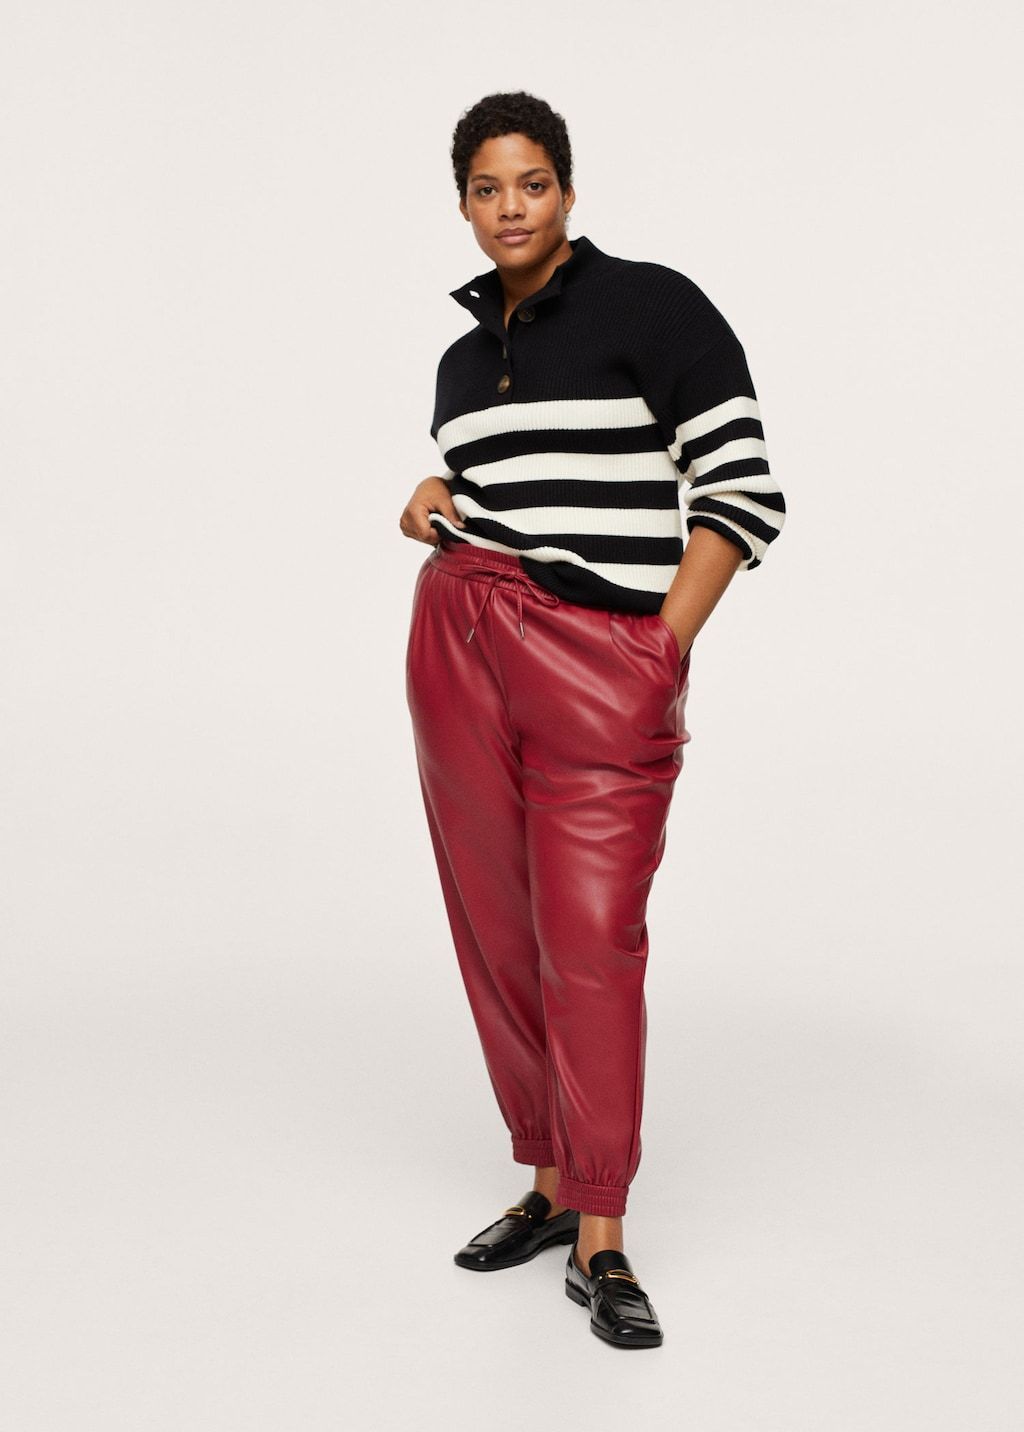 Sydne Style shows how to wear red pants for fall in lovers and friends   Sydne Style